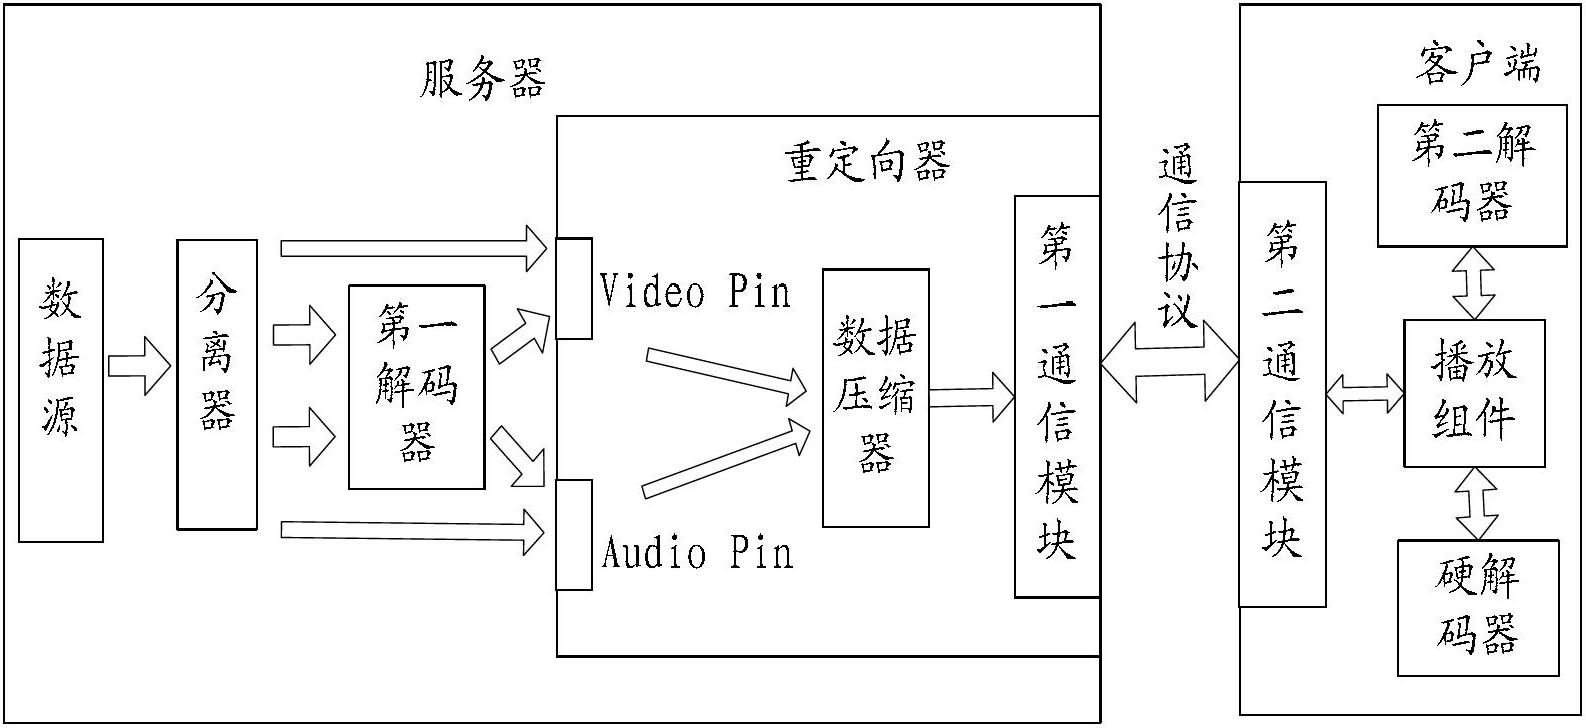 Method for carrying out software and hardware integrated audio/video redirection in VDI (Virtual Device Interface) environment